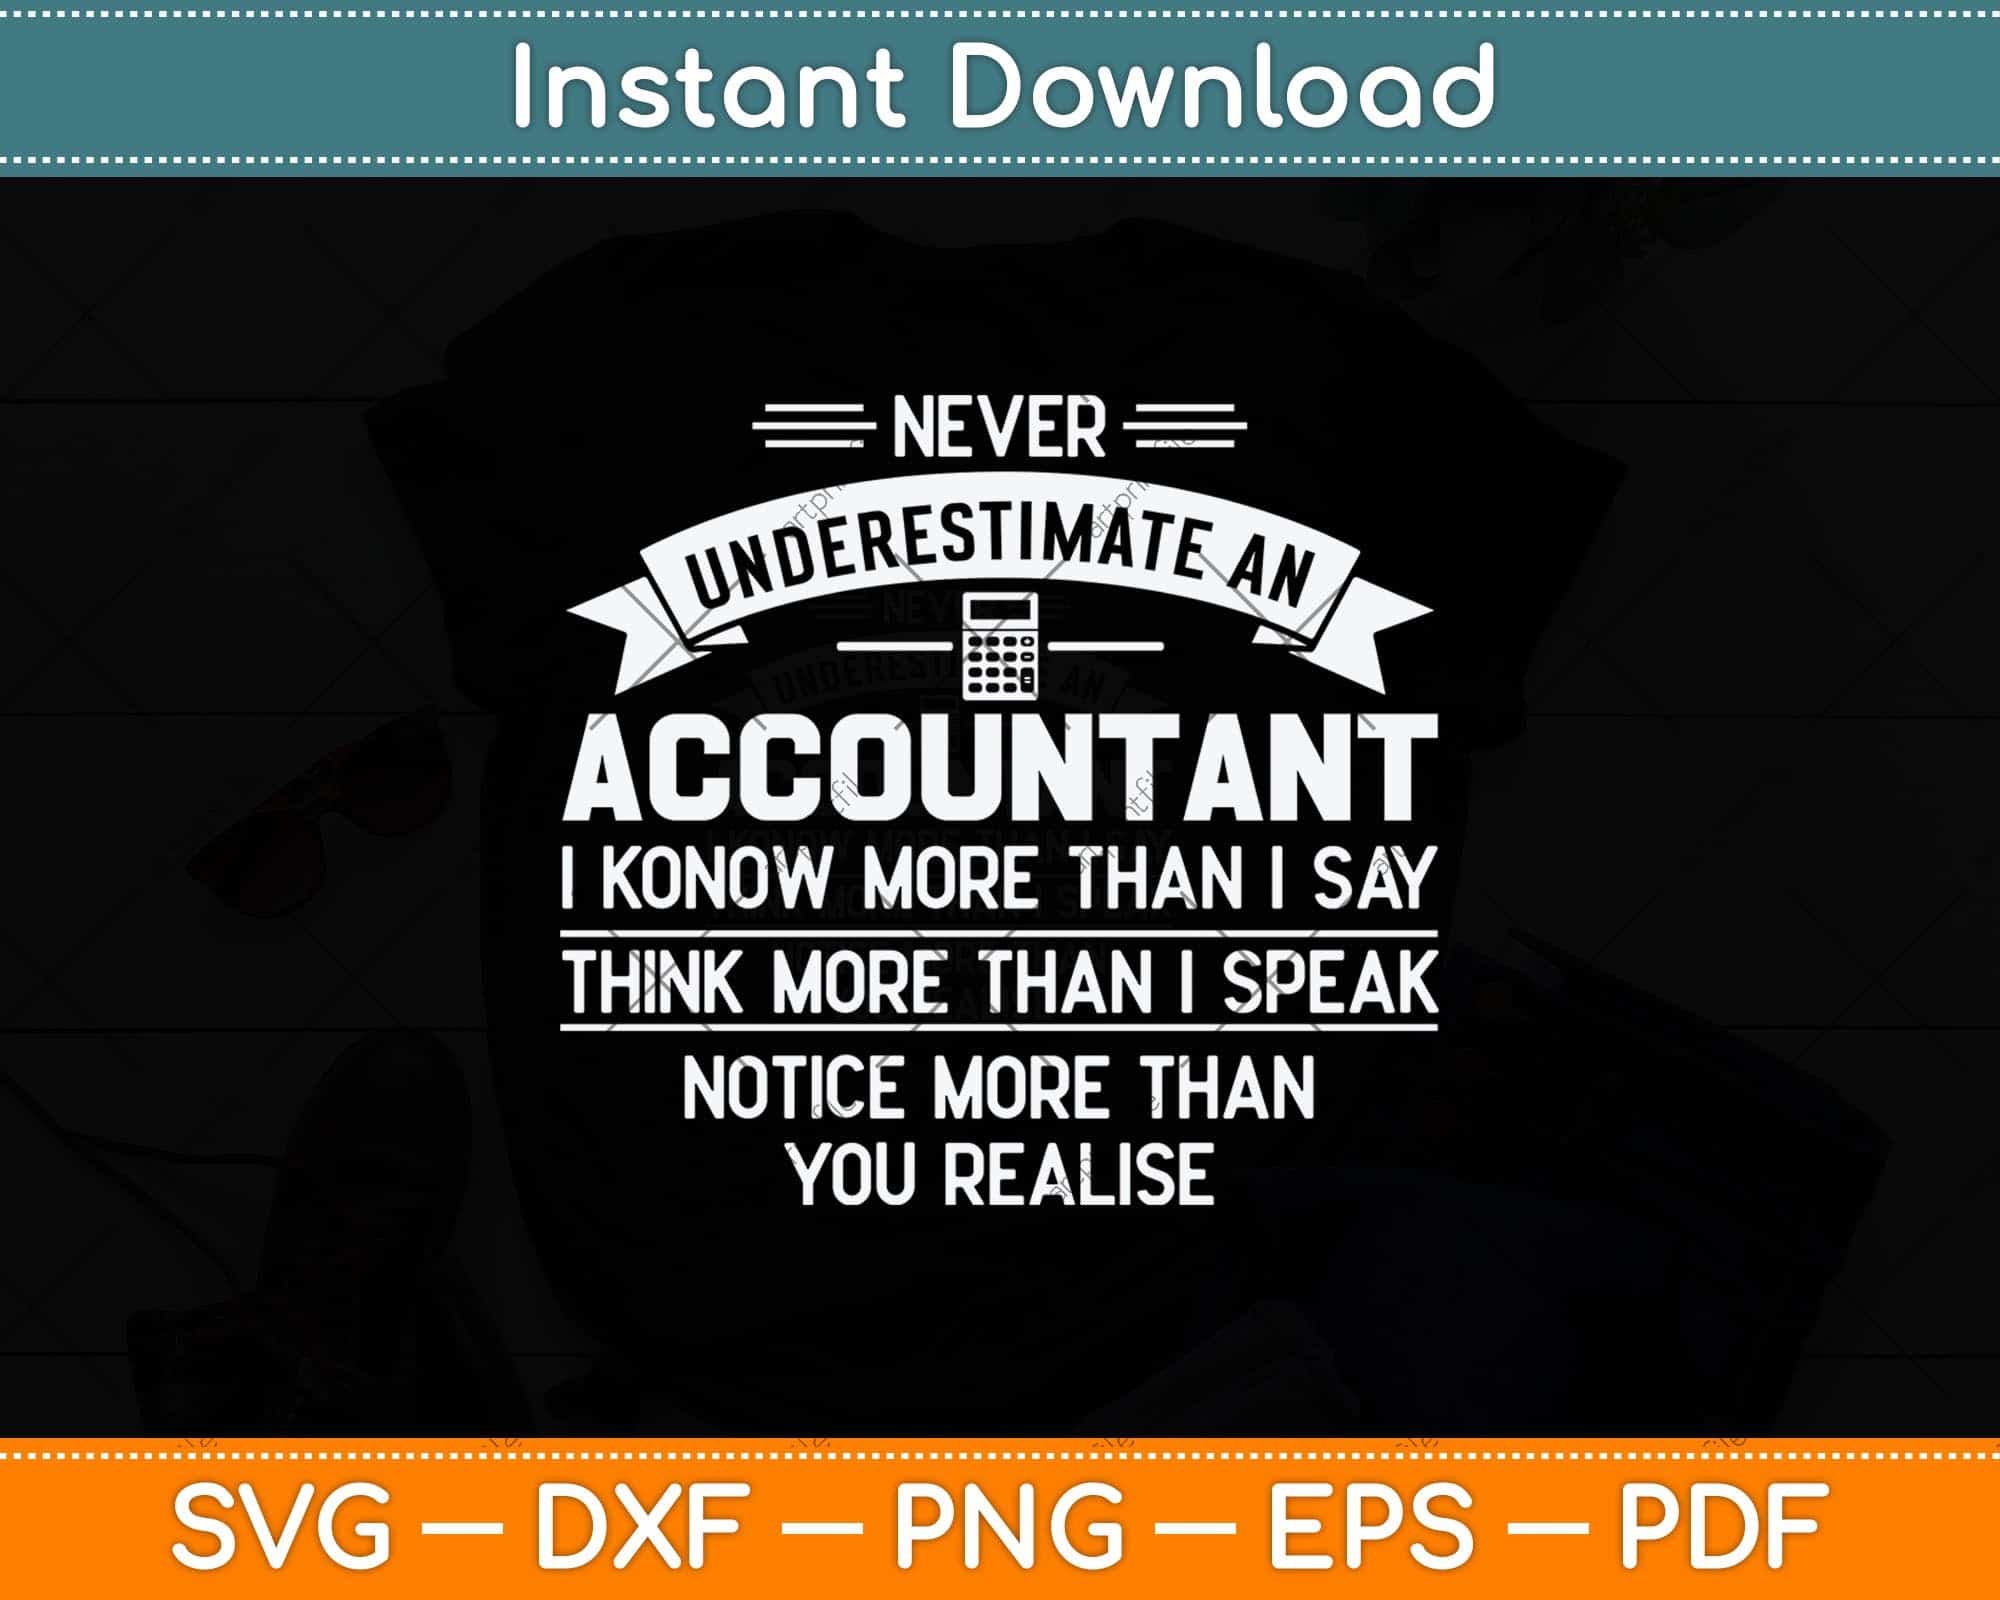 funny accountant quotes